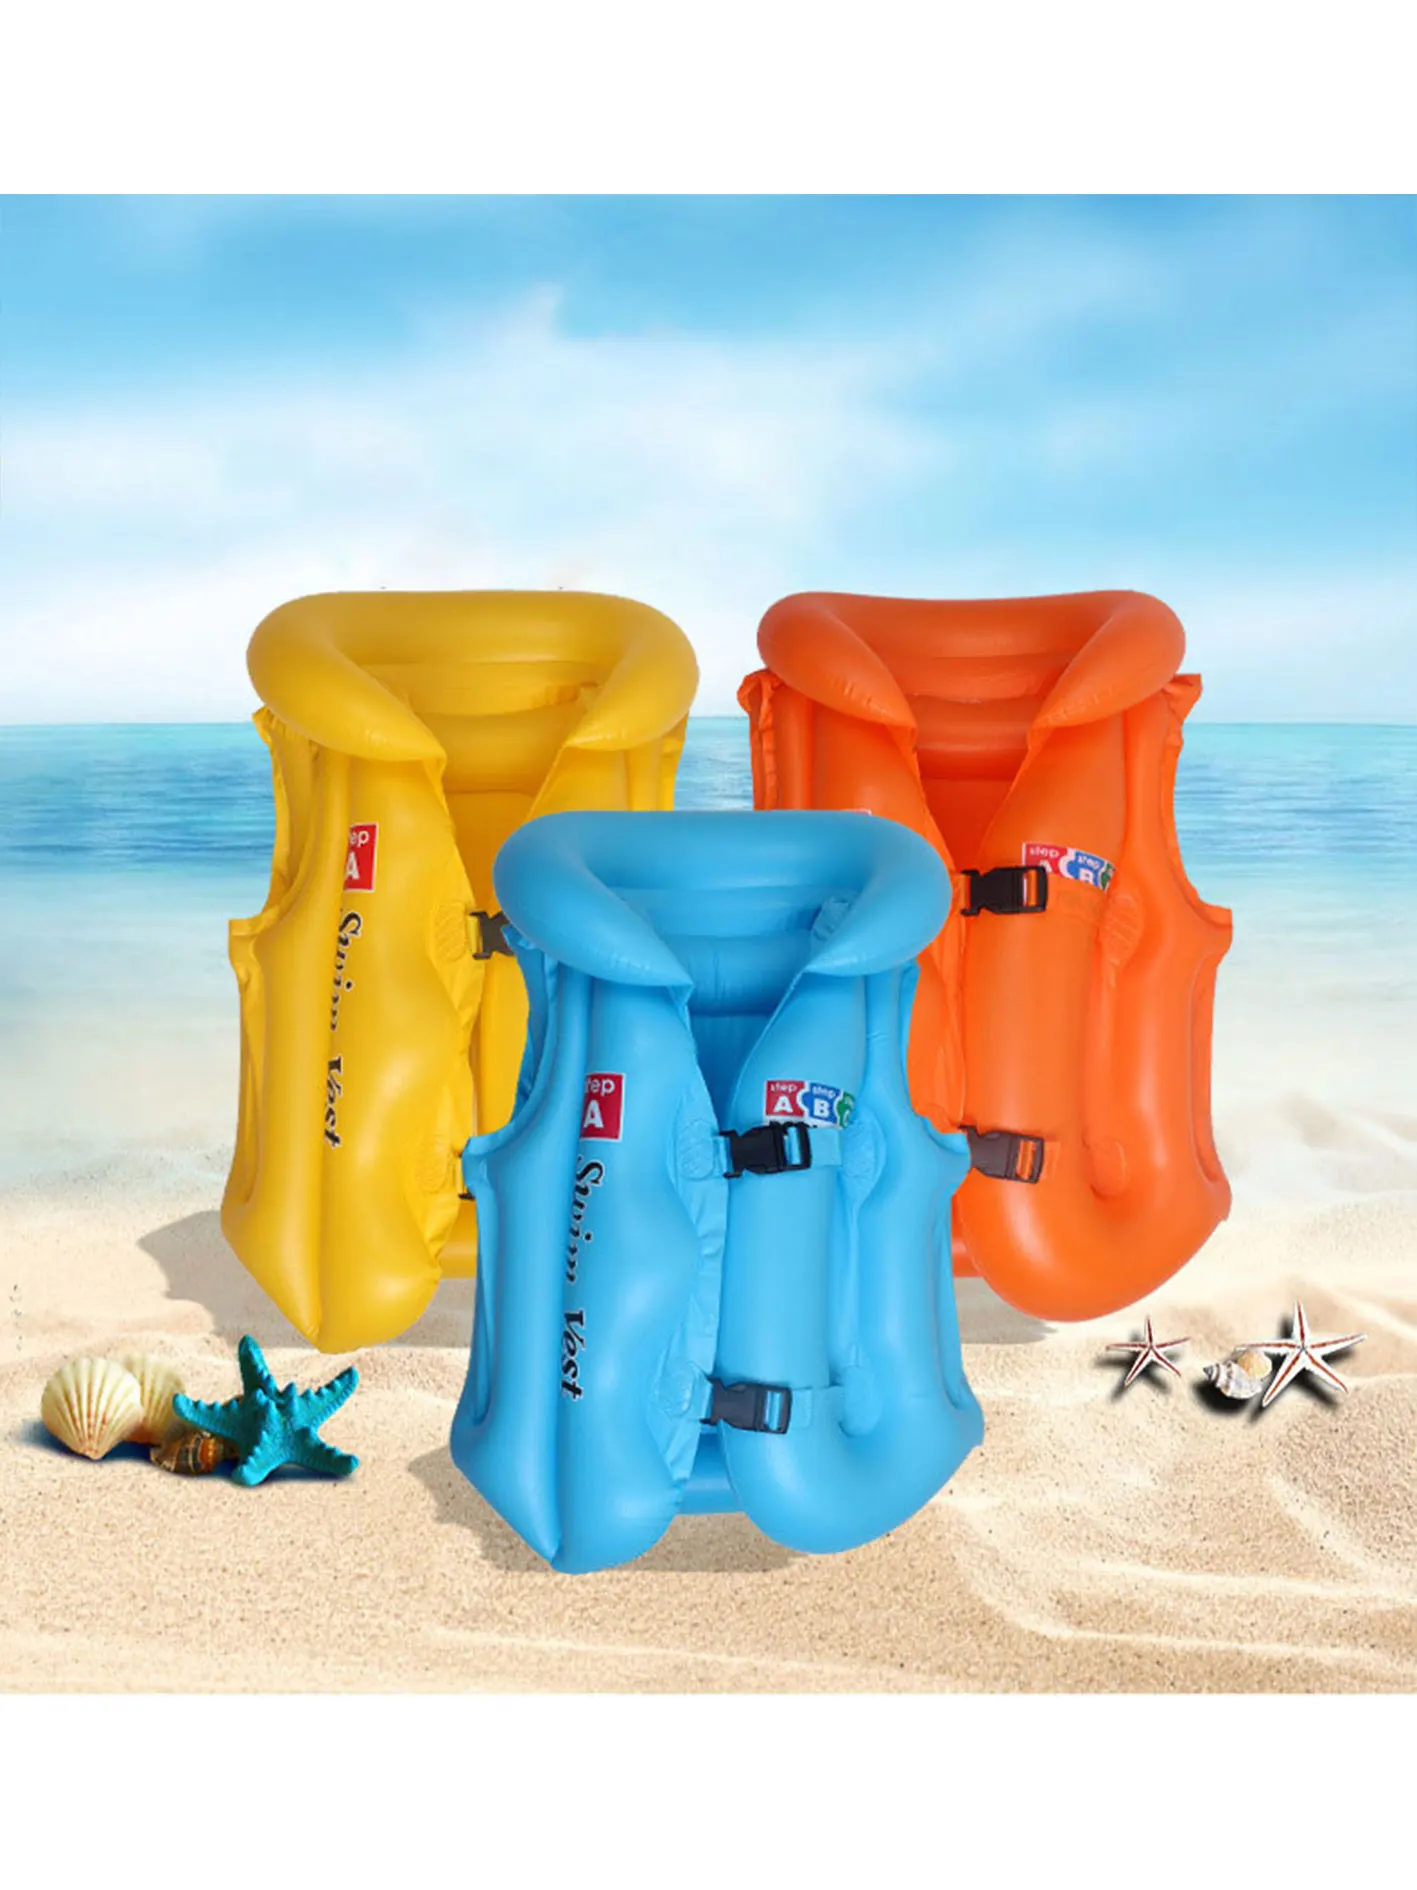 Kids Simple Atmosphere Life Jackets Inflatable Children Swimwear For Water Sport Boating Swimming Pool Accessories baby comfort sleeping aid instrument children s music sleeping white noise sleeping aid instrument led atmosphere night light